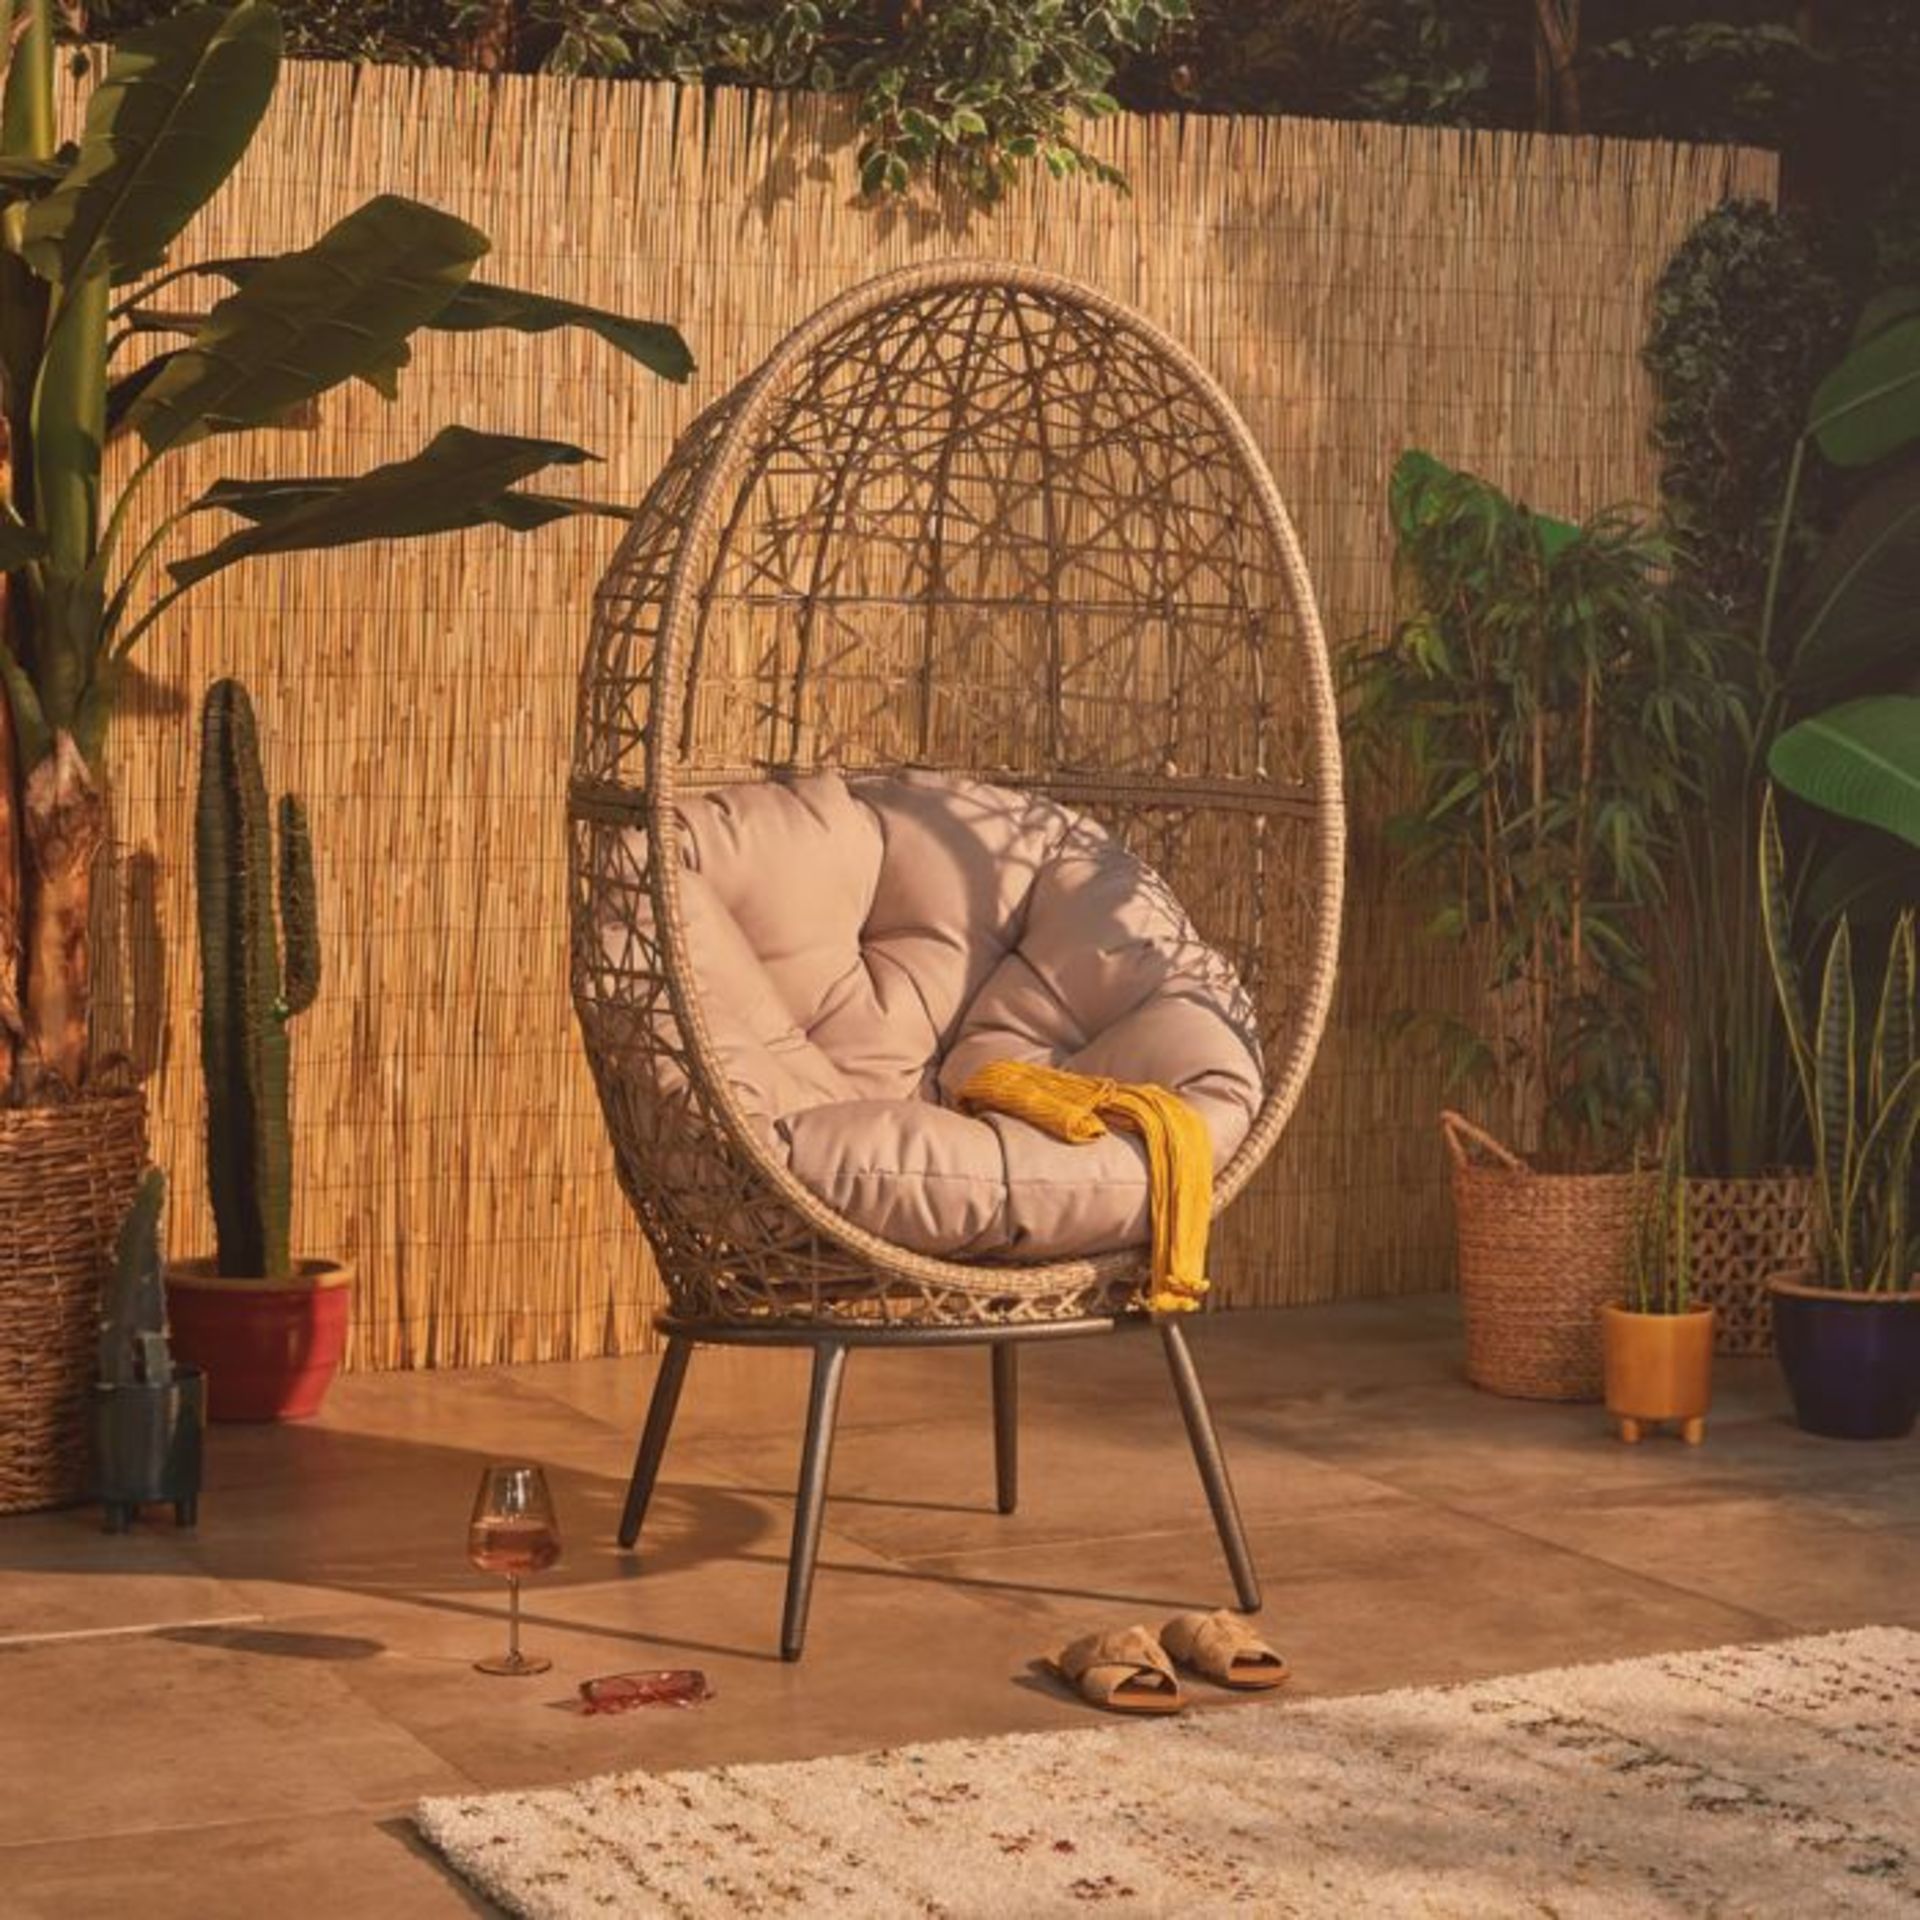 Freestanding Natural Rattan Egg Chair. RRP £549.99. Get cosy on this rattan cocoon chair. ( - Image 3 of 3